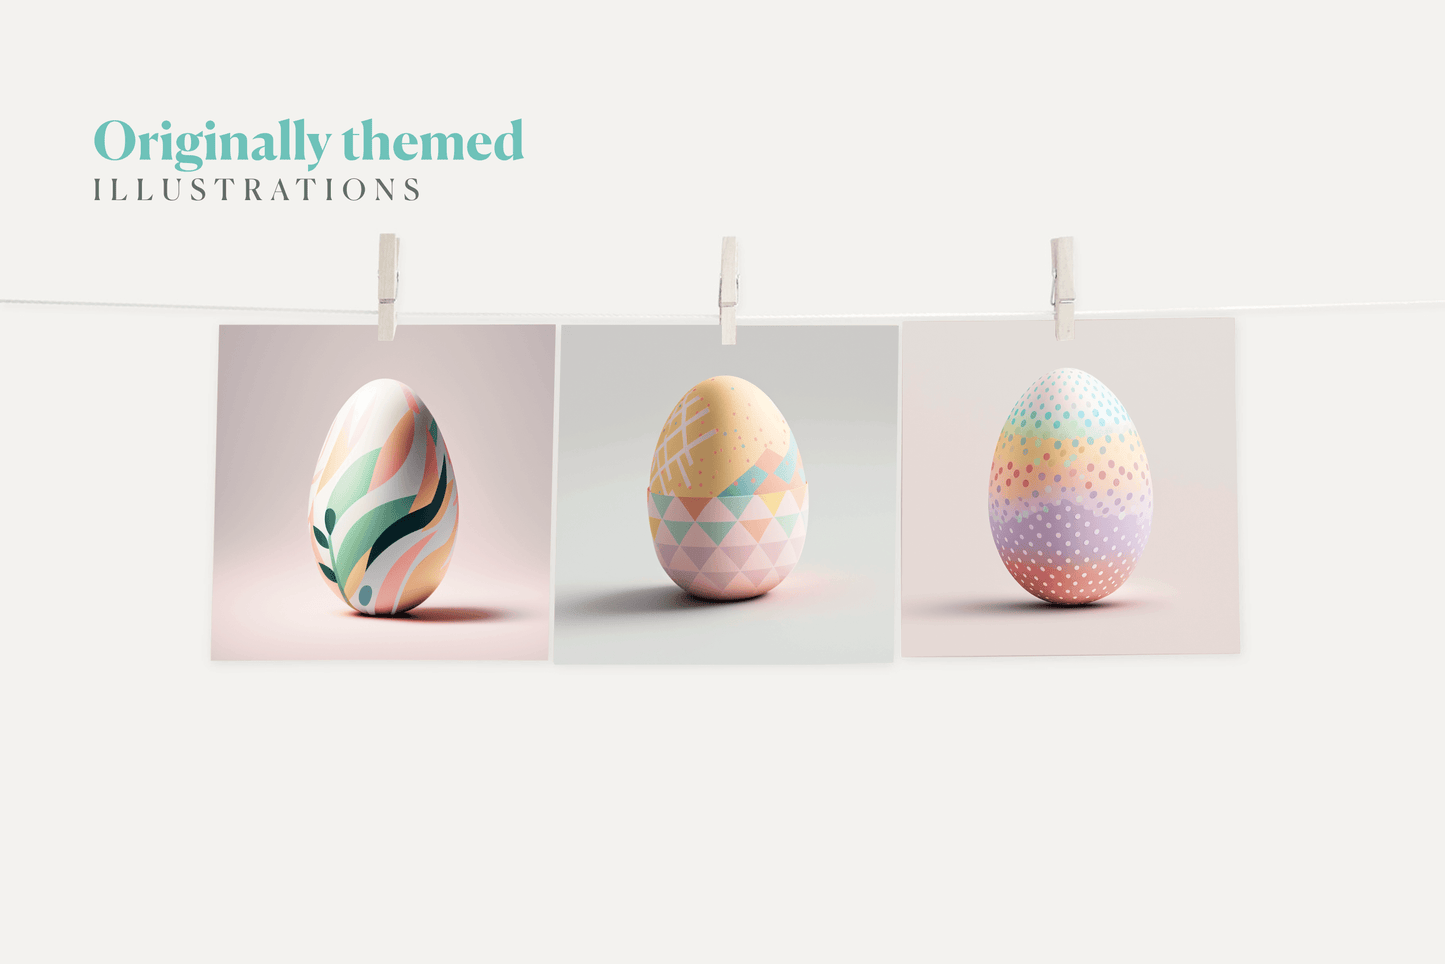 Hanging polaroid photographs of beautifully decorated easter eggs with minimalist patterns